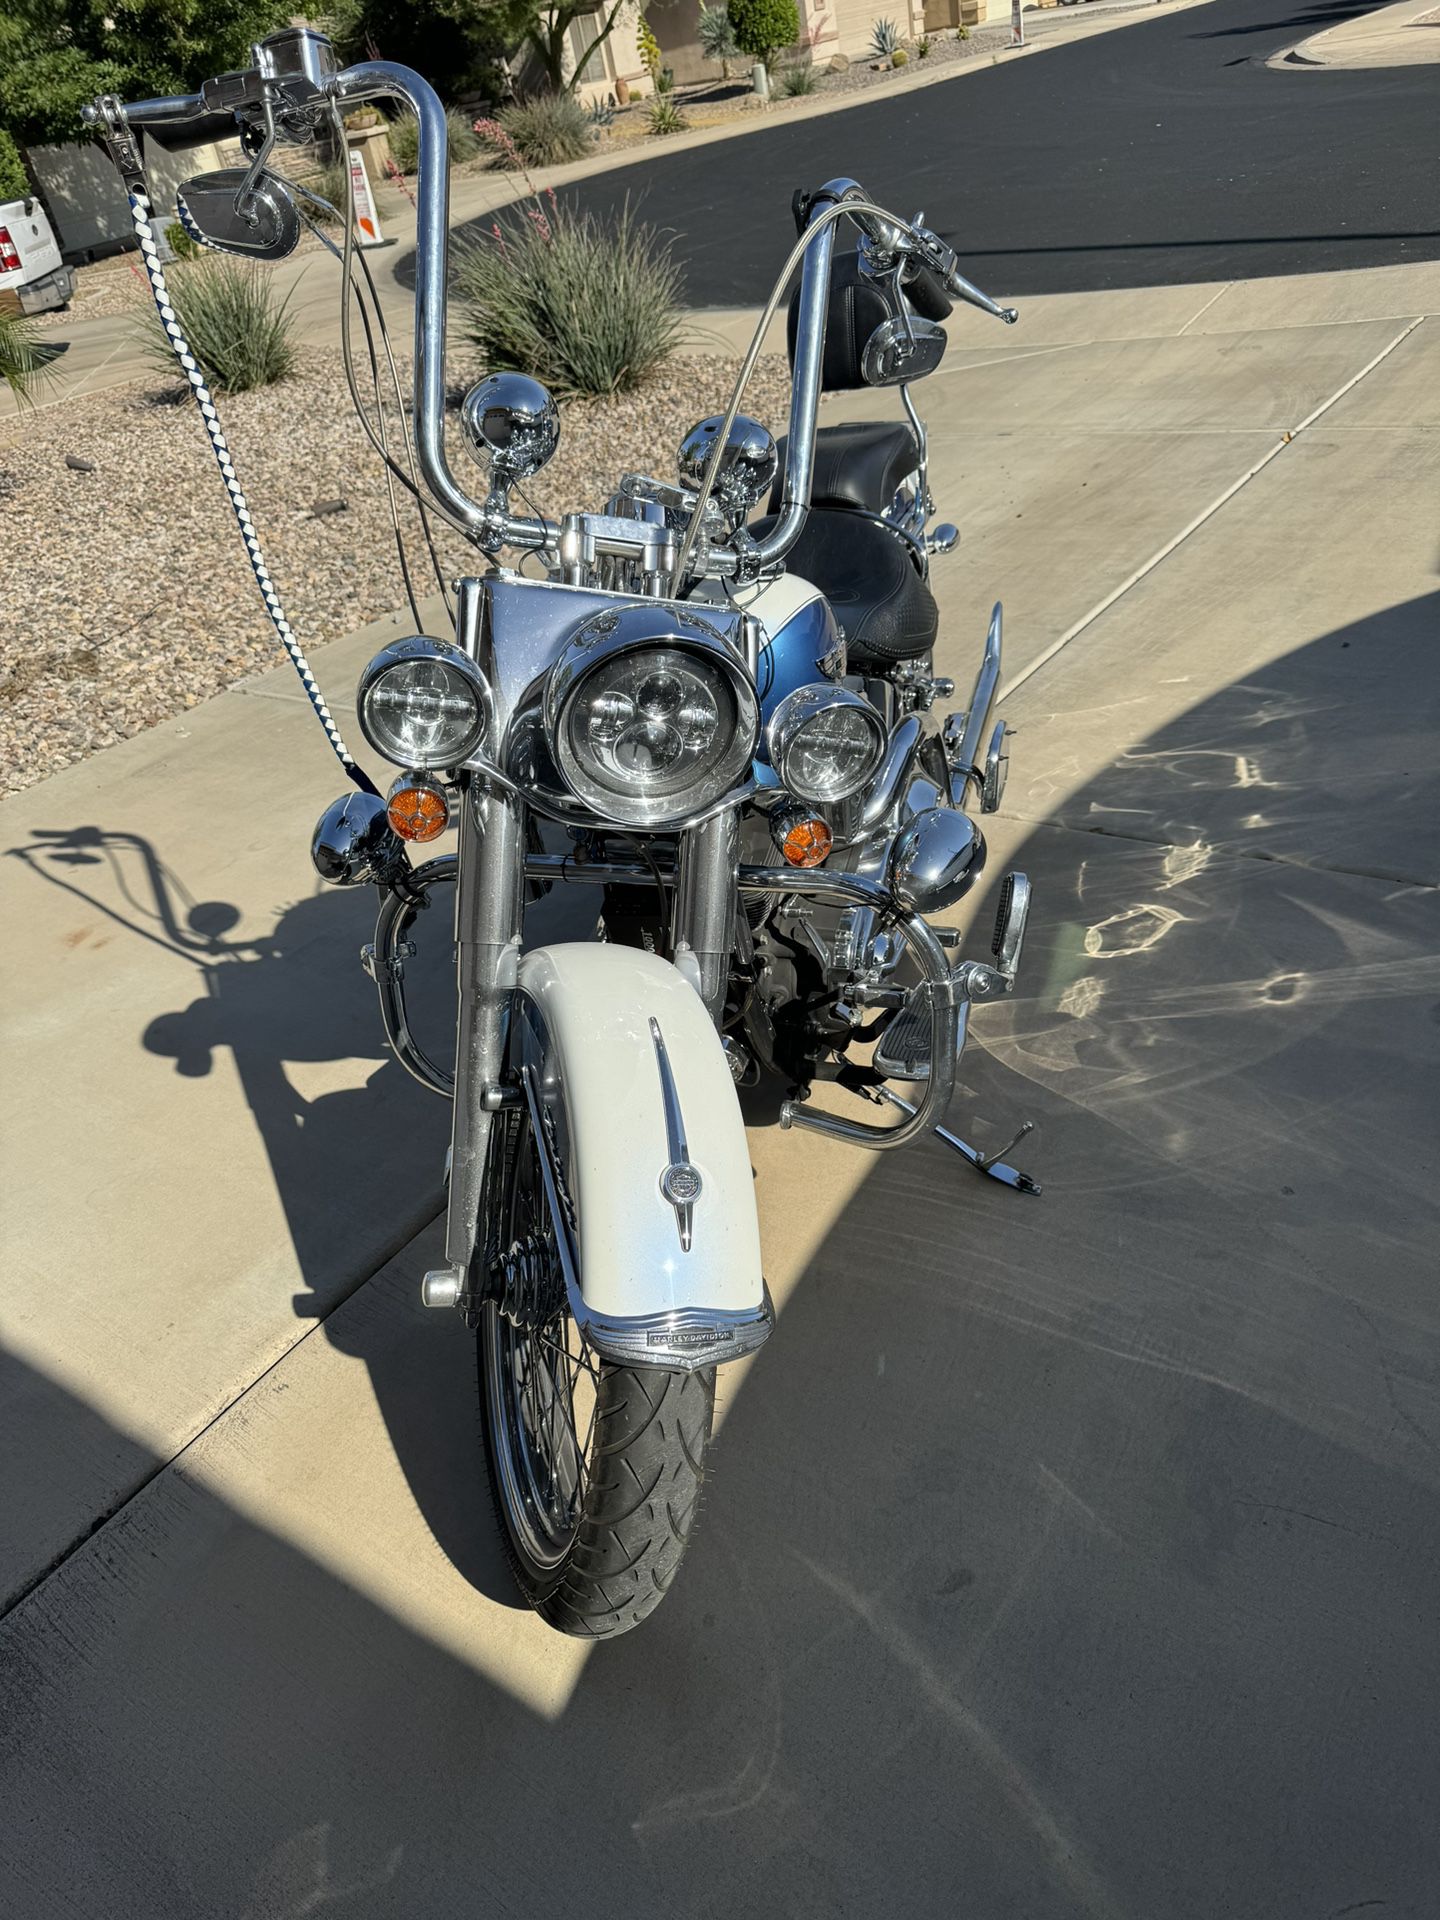 2005 Harley Davidson Soft tail deluxe